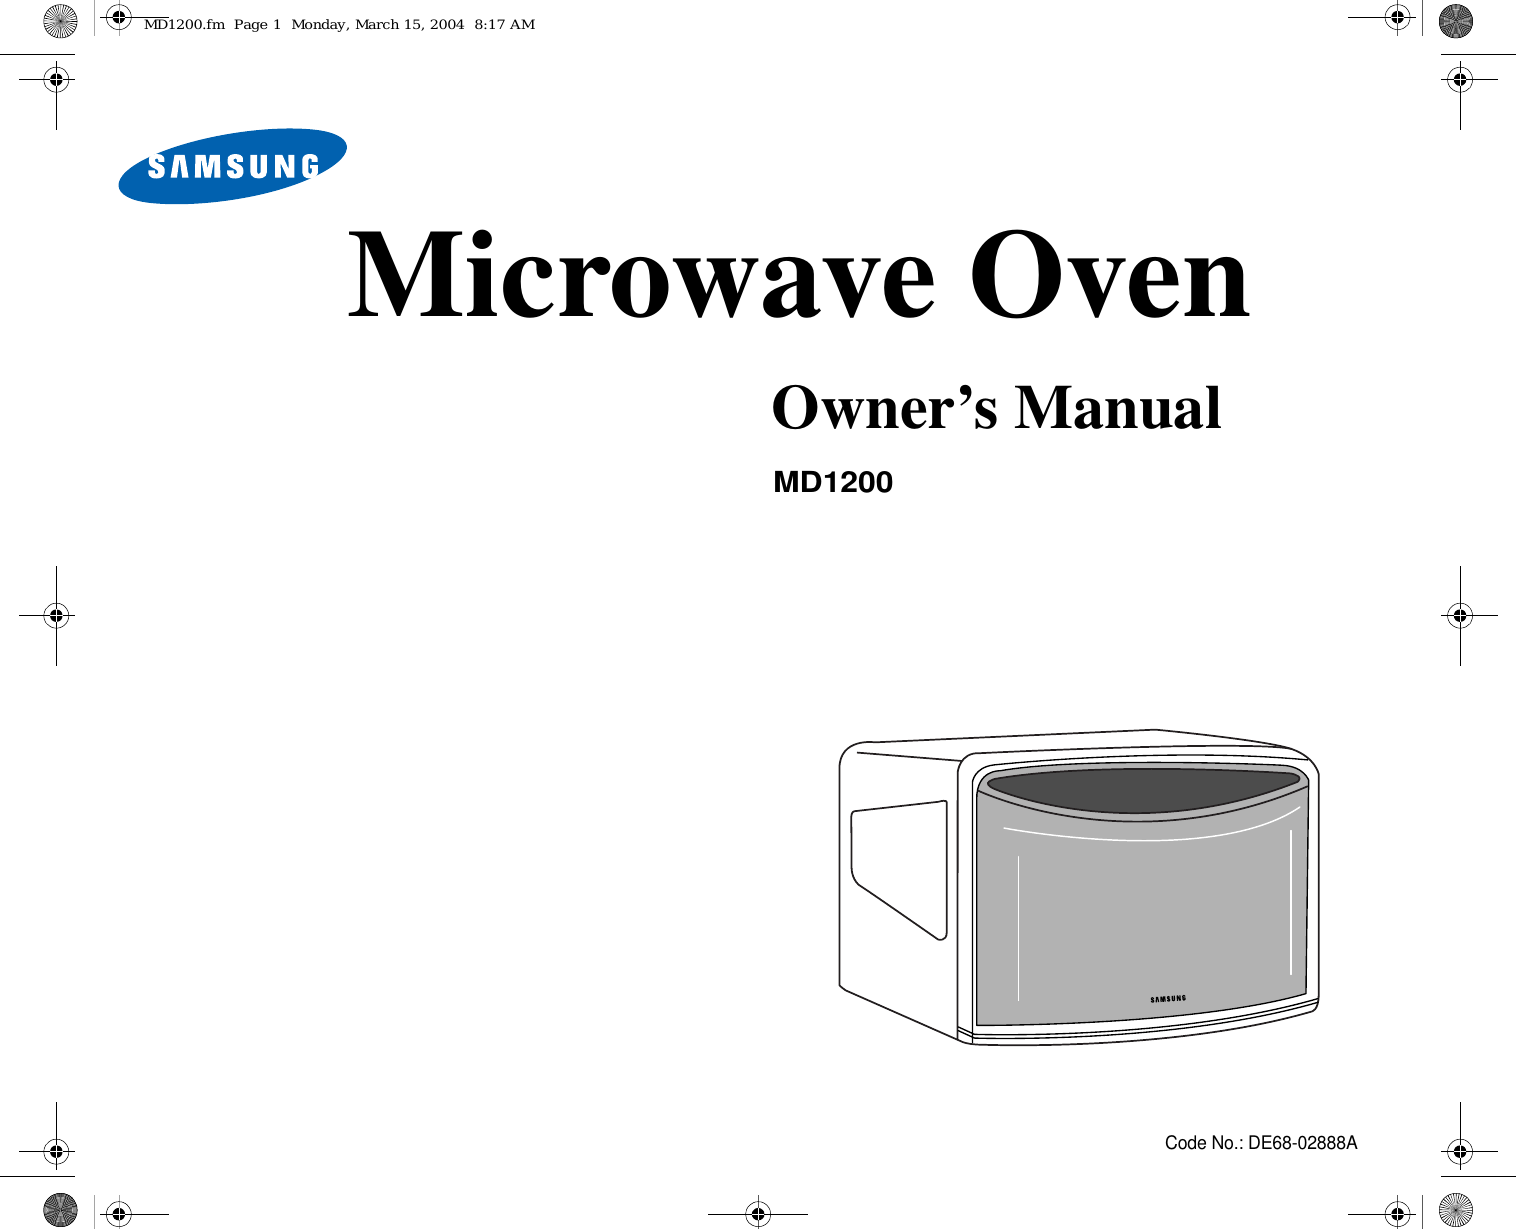 Code No.: DE68-02888AMicrowave OvenOwner’s ManualMD1200MD1200.fm  Page 1  Monday, March 15, 2004  8:17 AM